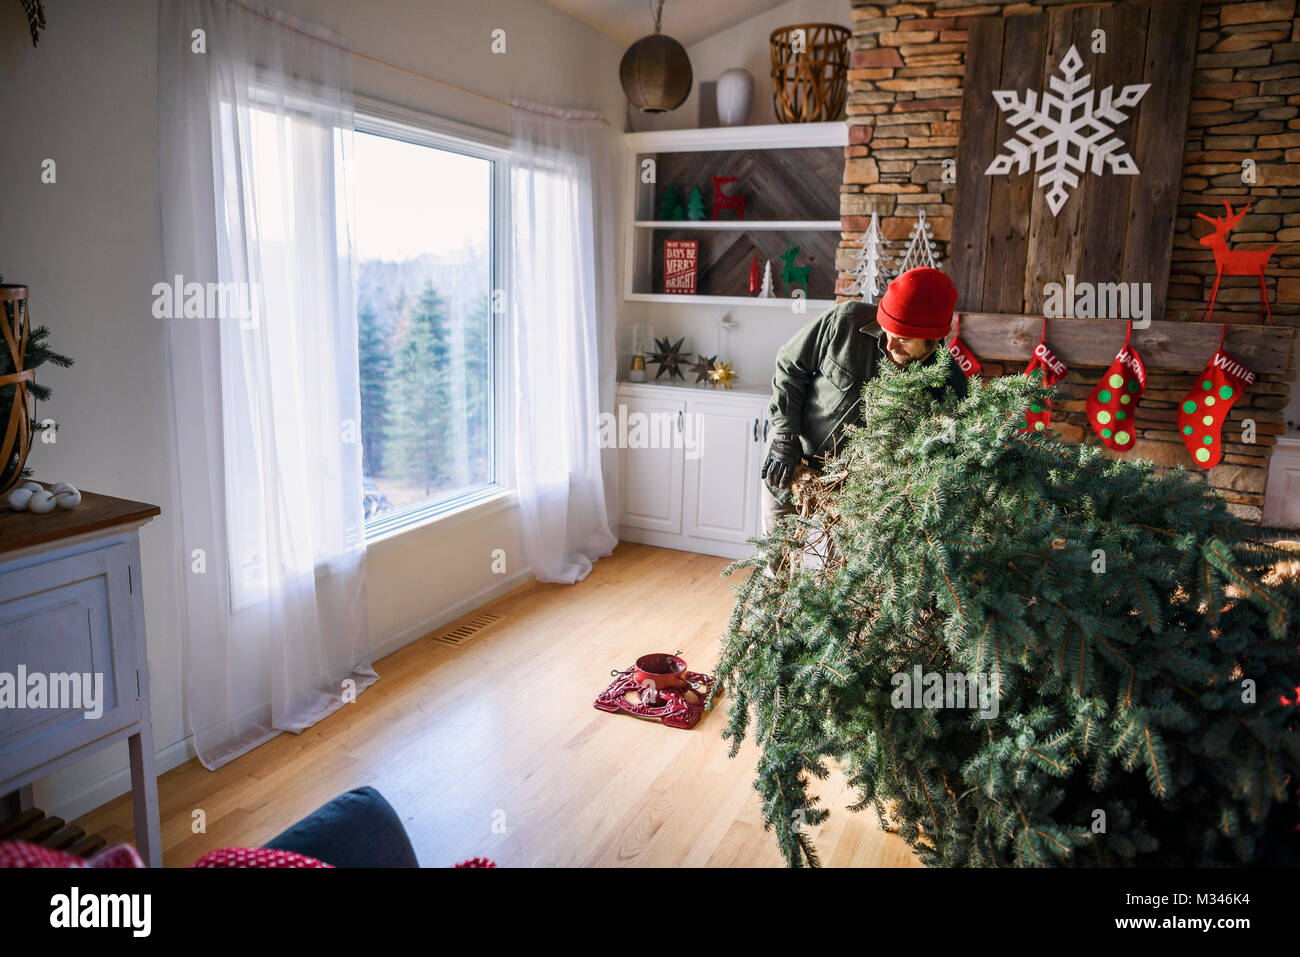 Man setting up a Christmas tree in the living room Stock Photo